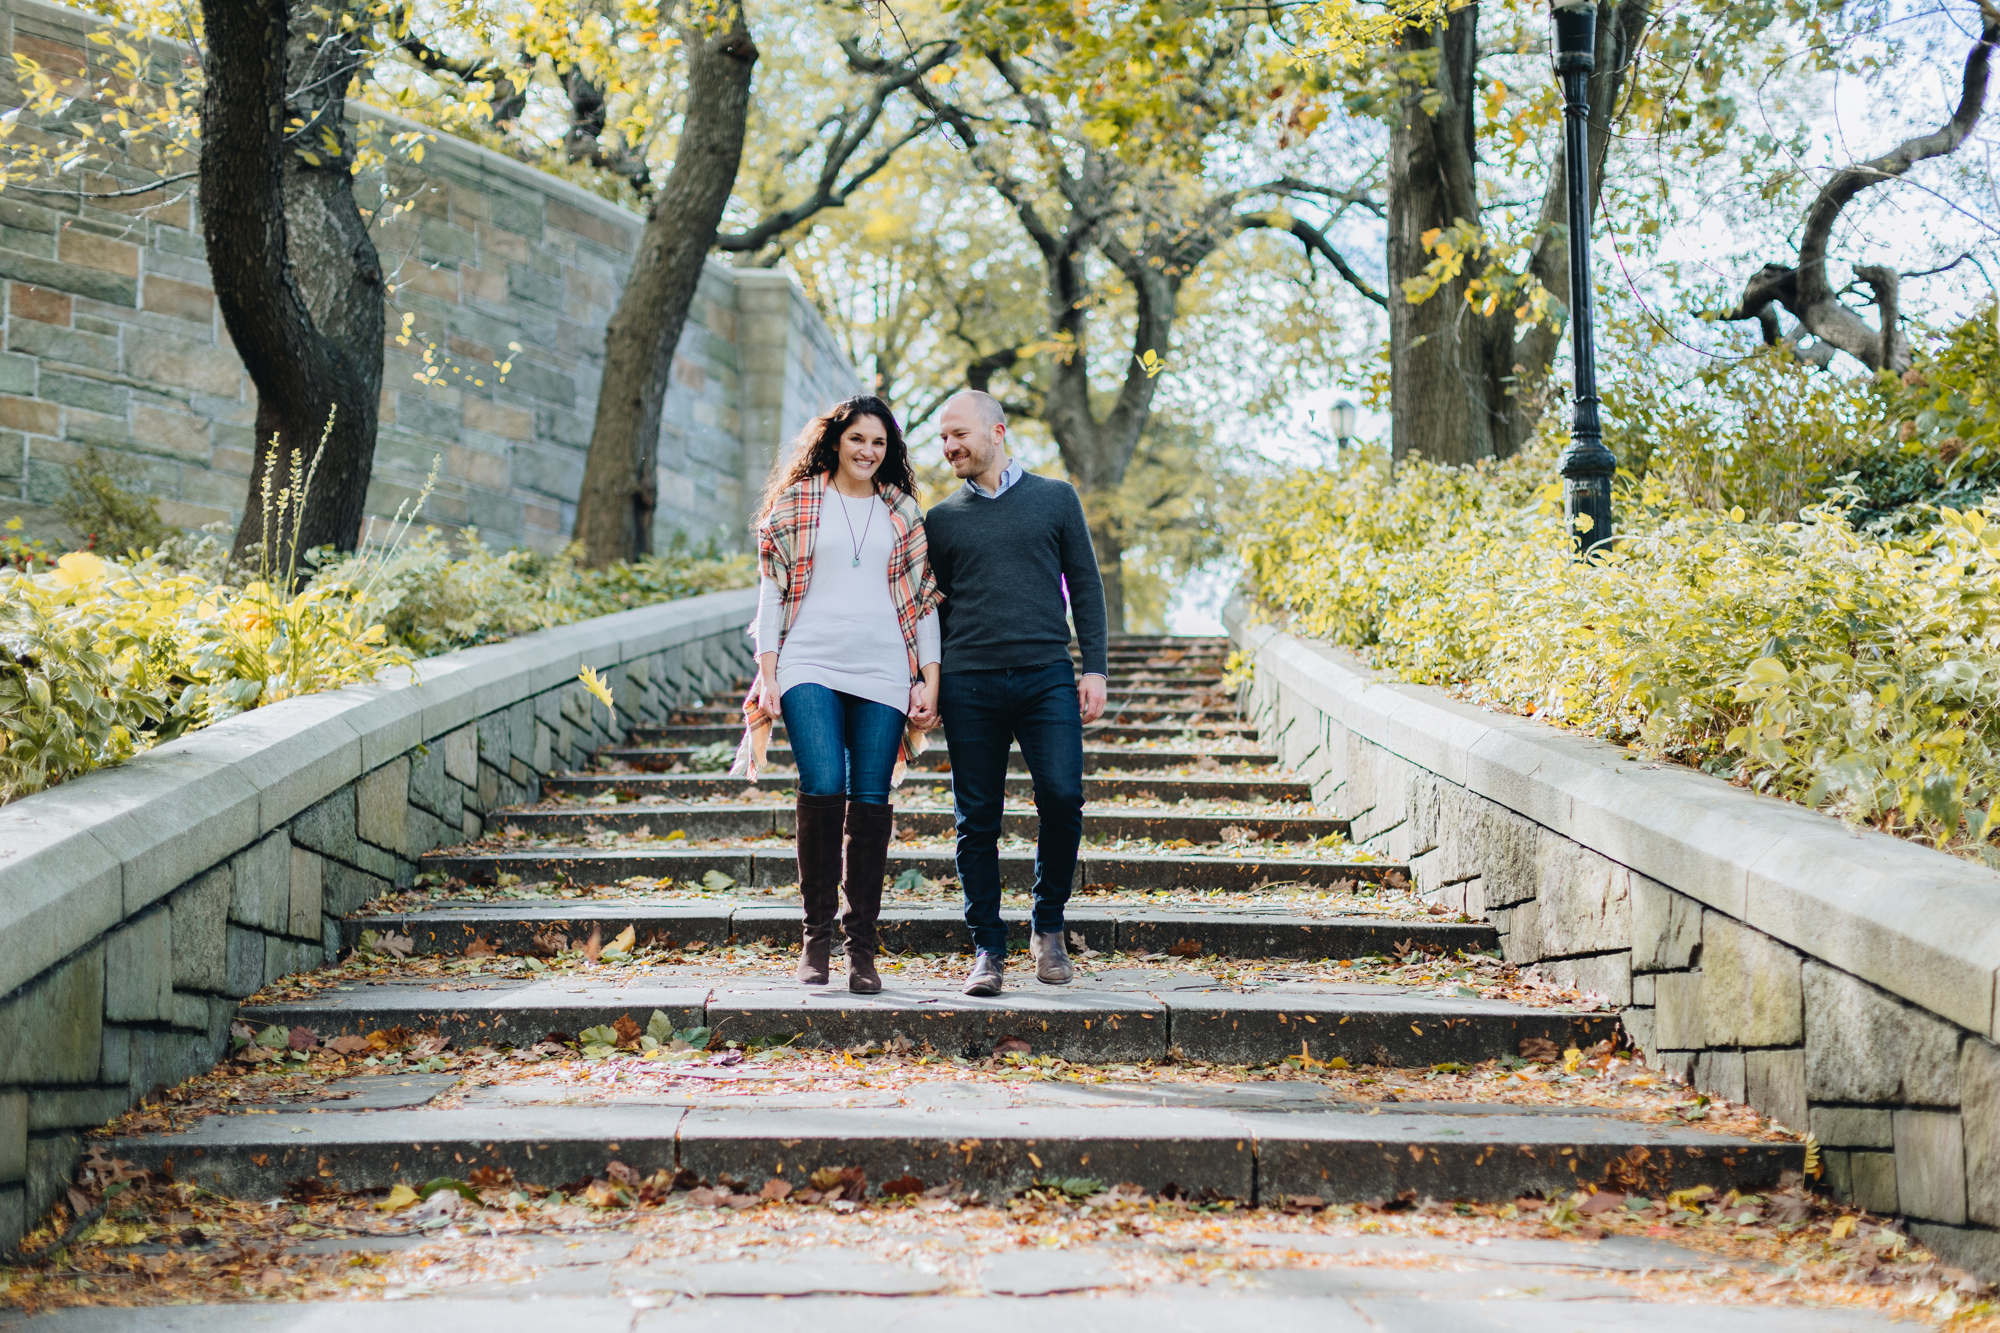 Magical Fall Riverside Park Engagement Photography